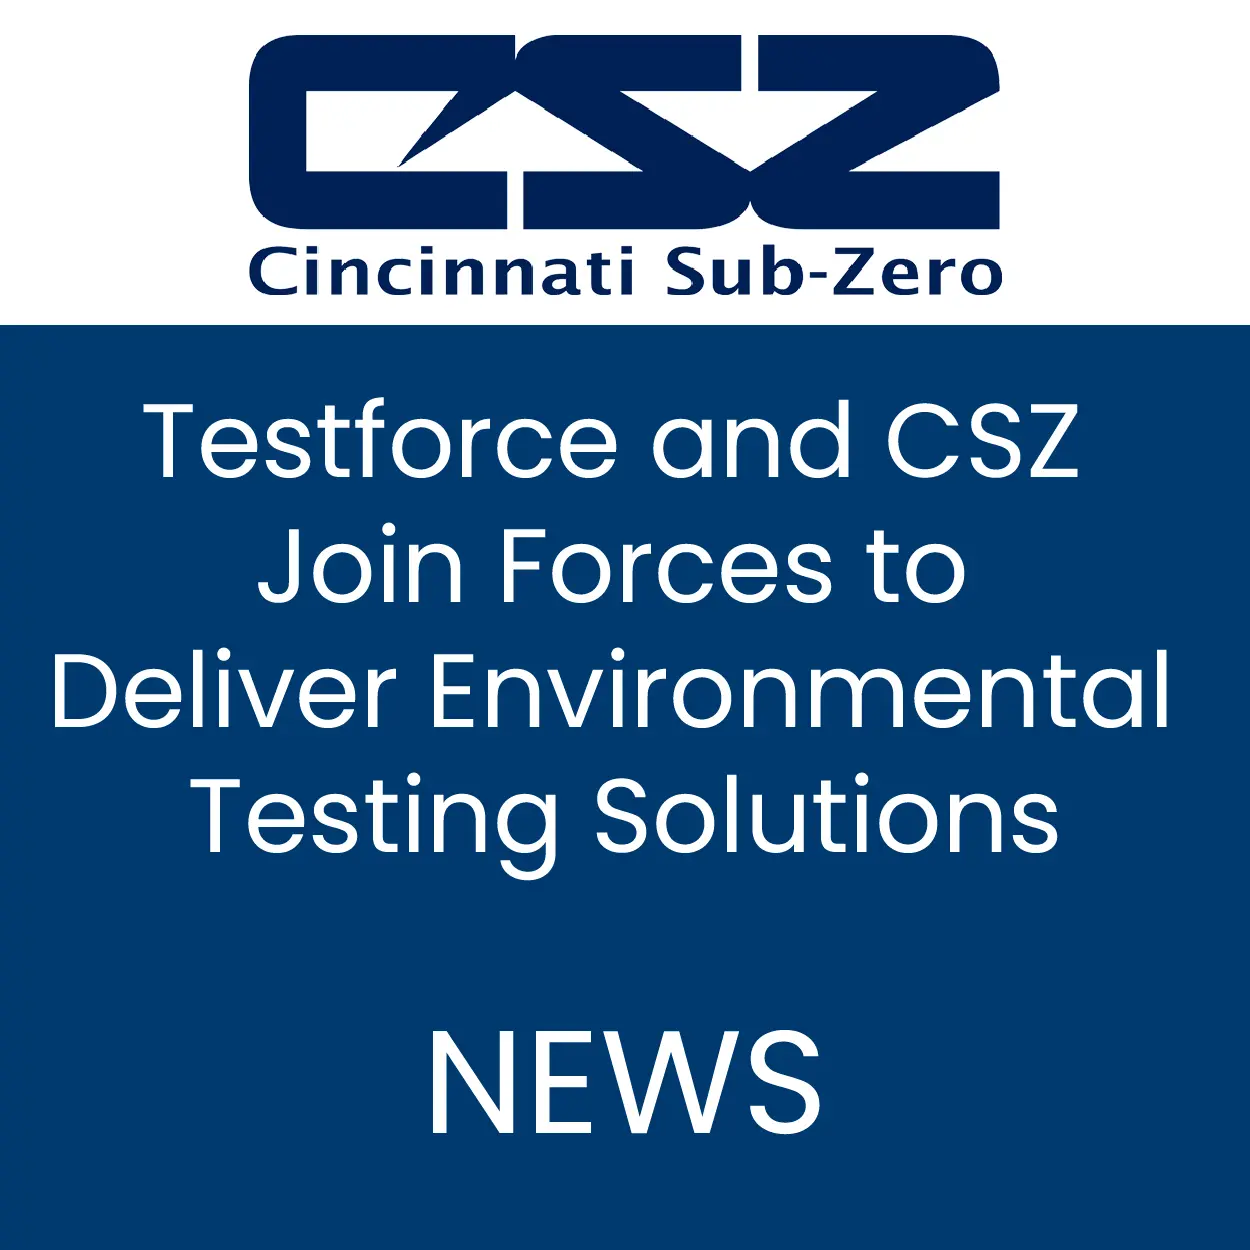 Testforce and Cincinnati Sub-Zero Join Forces to Deliver Cutting Edge Environmental Testing Solutions